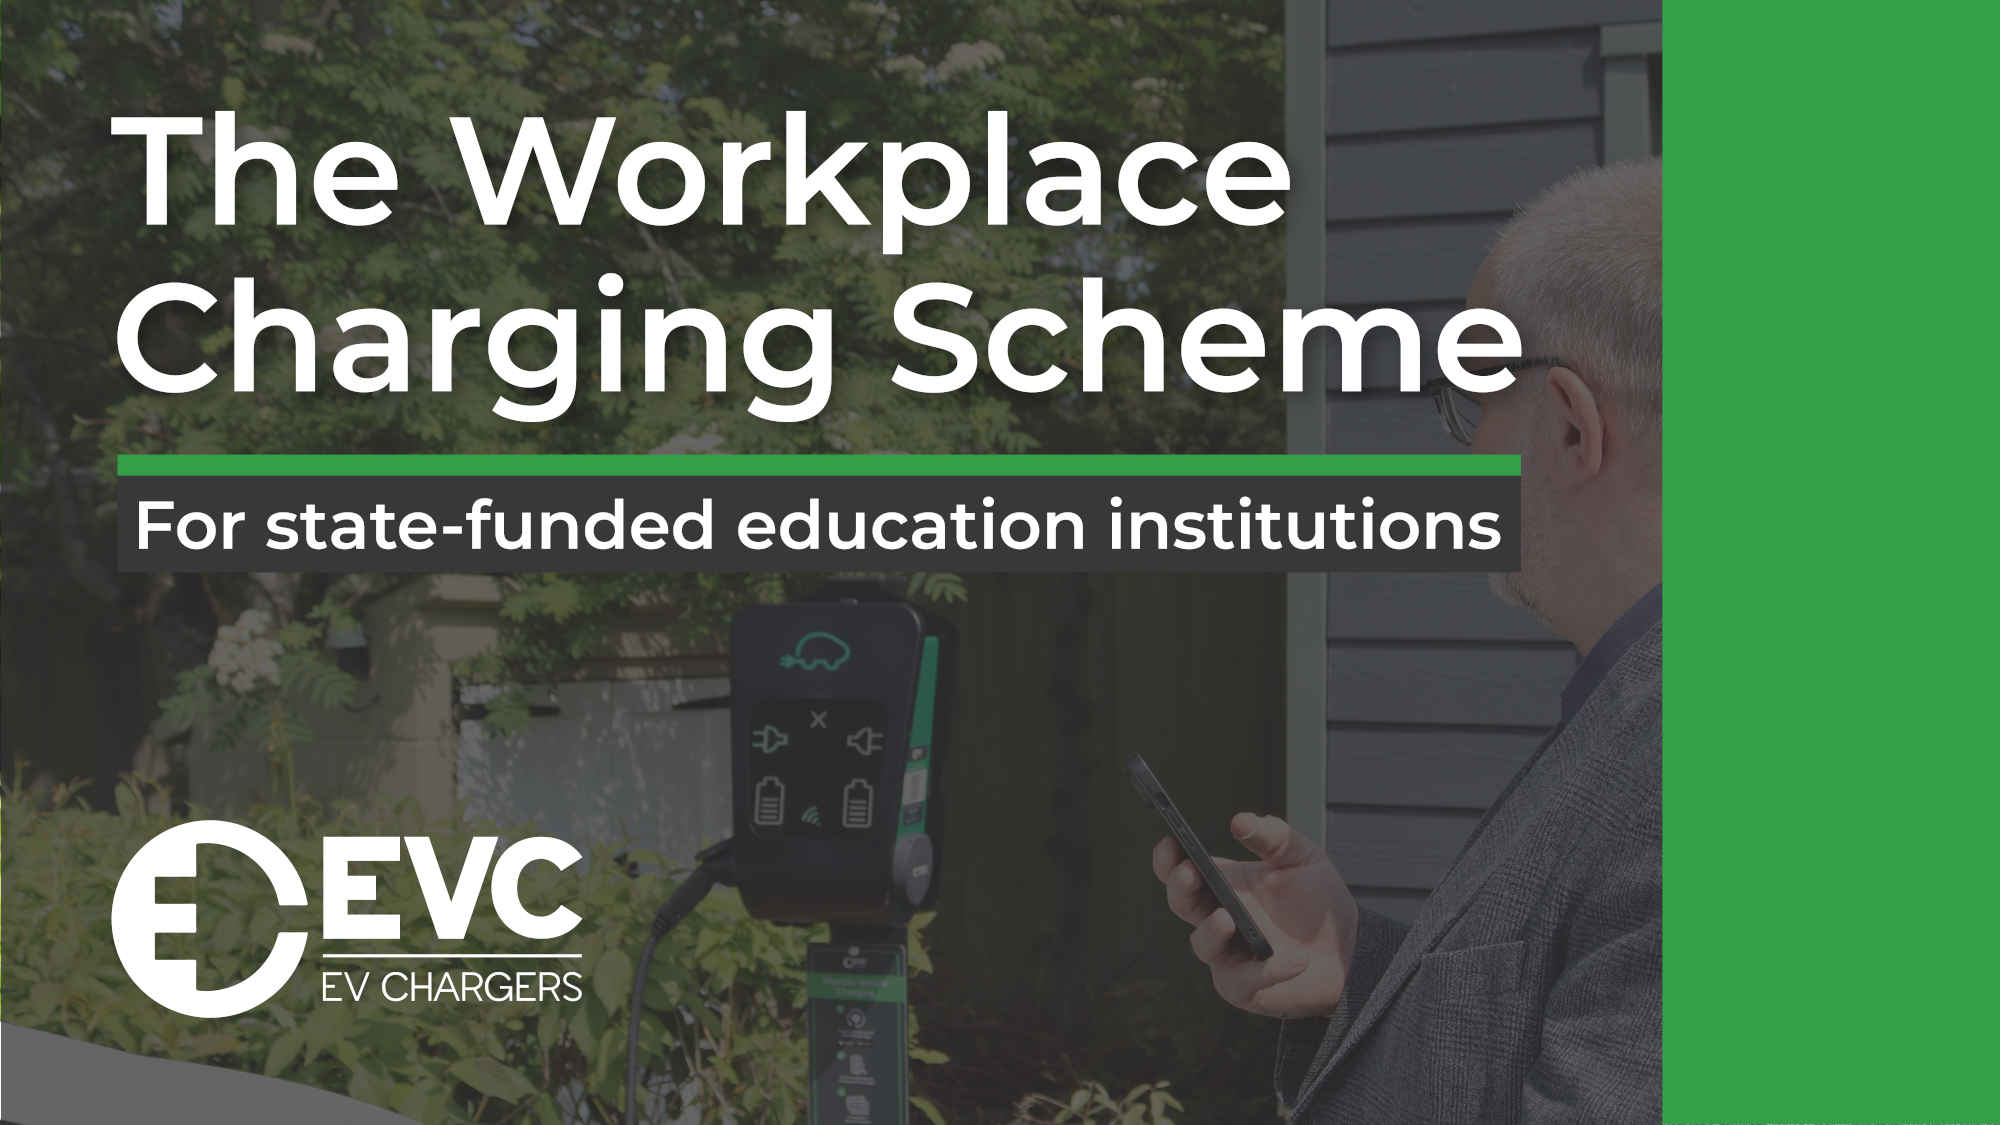 The Workplace Charging Scheme for state-funded education institutions